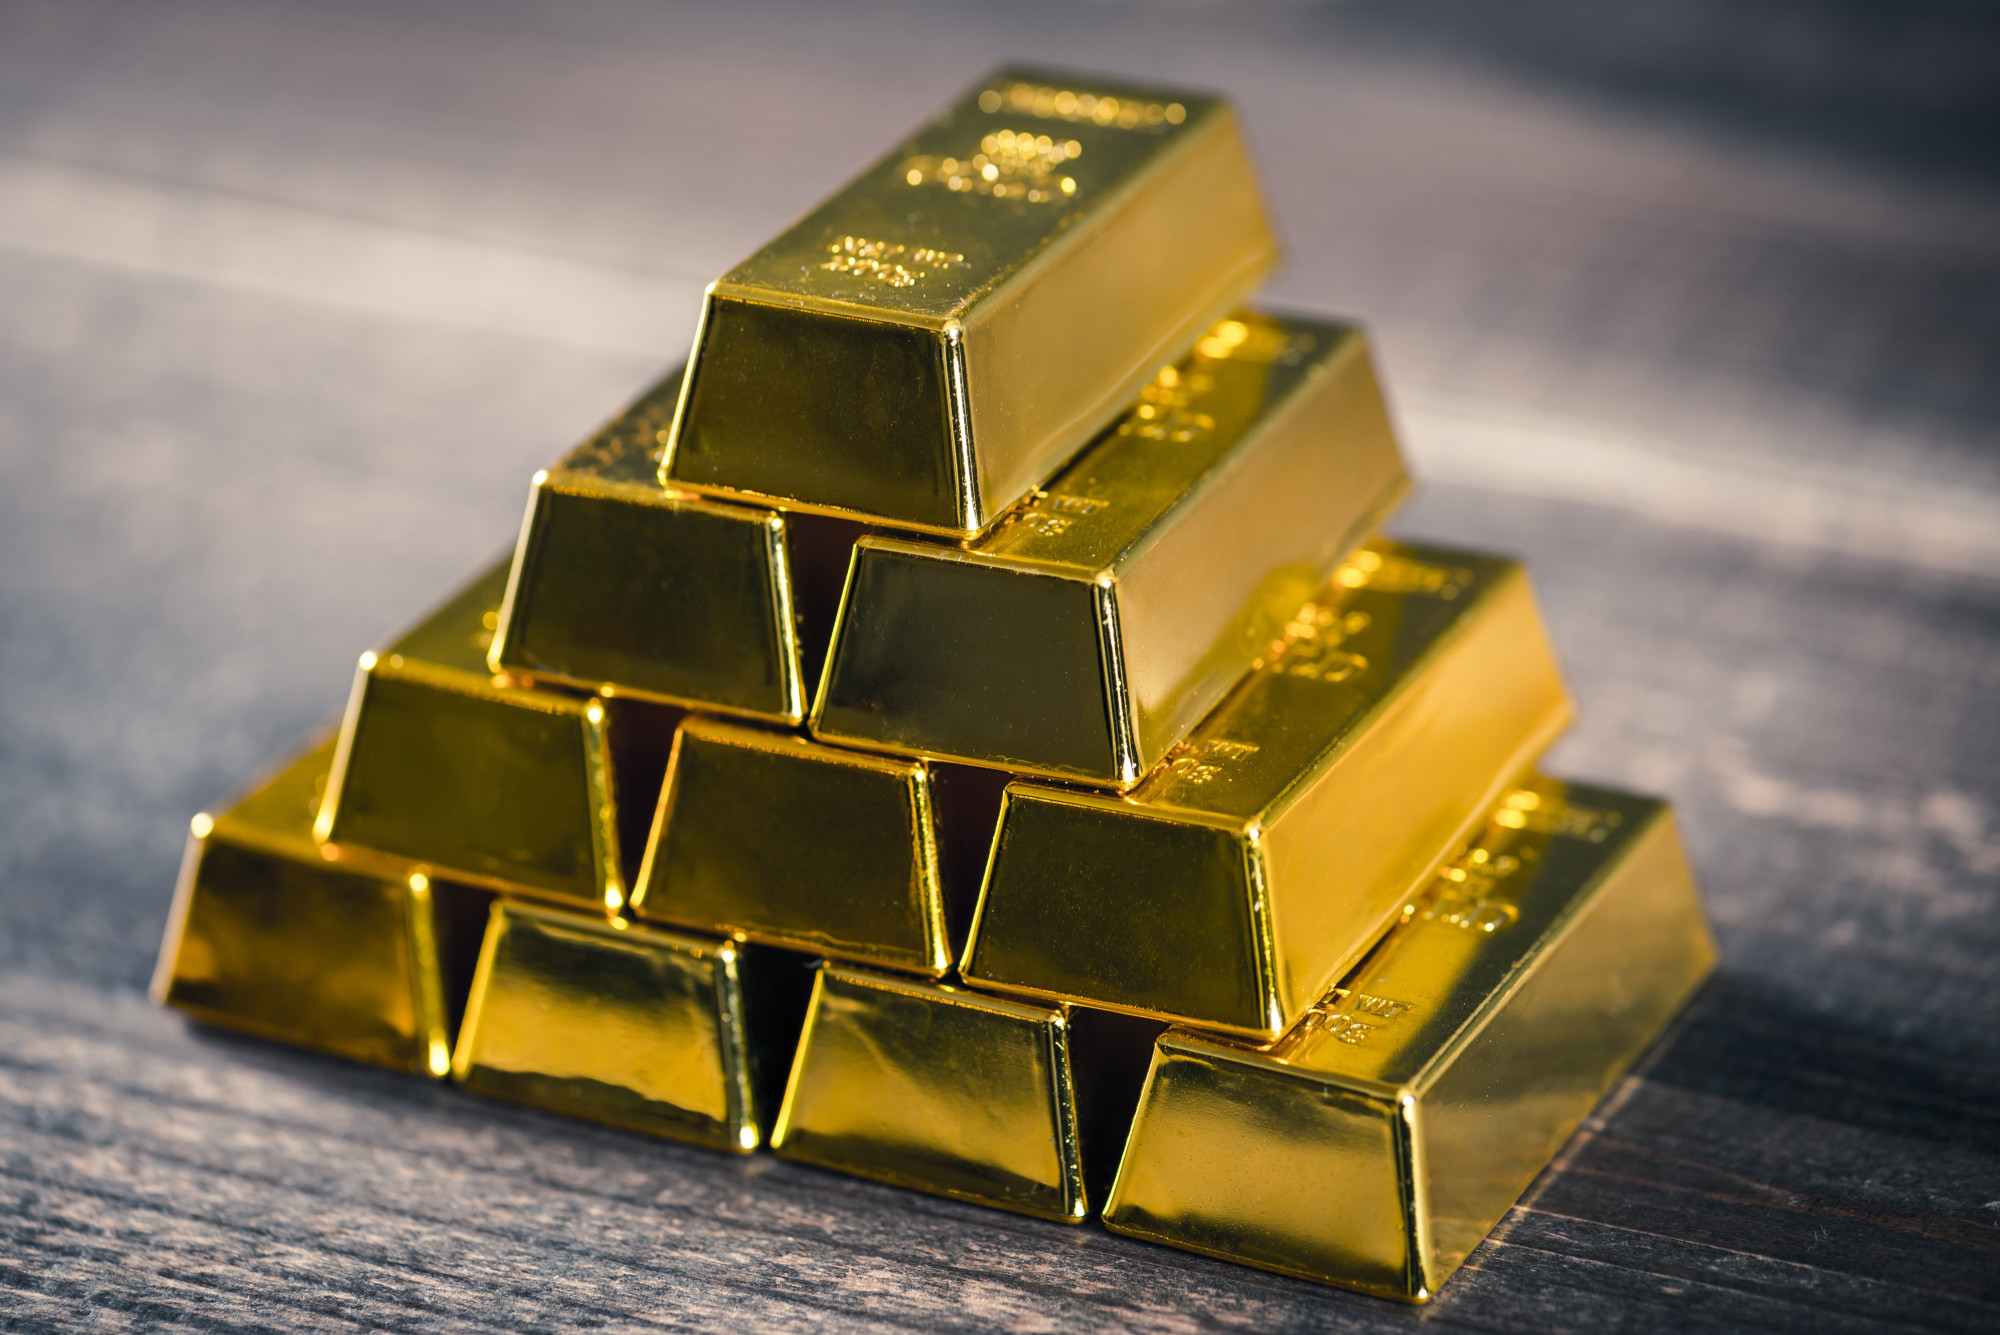 Birch Gold Group is one of the leading investment companies that focus on precious metals. Read on for more information.